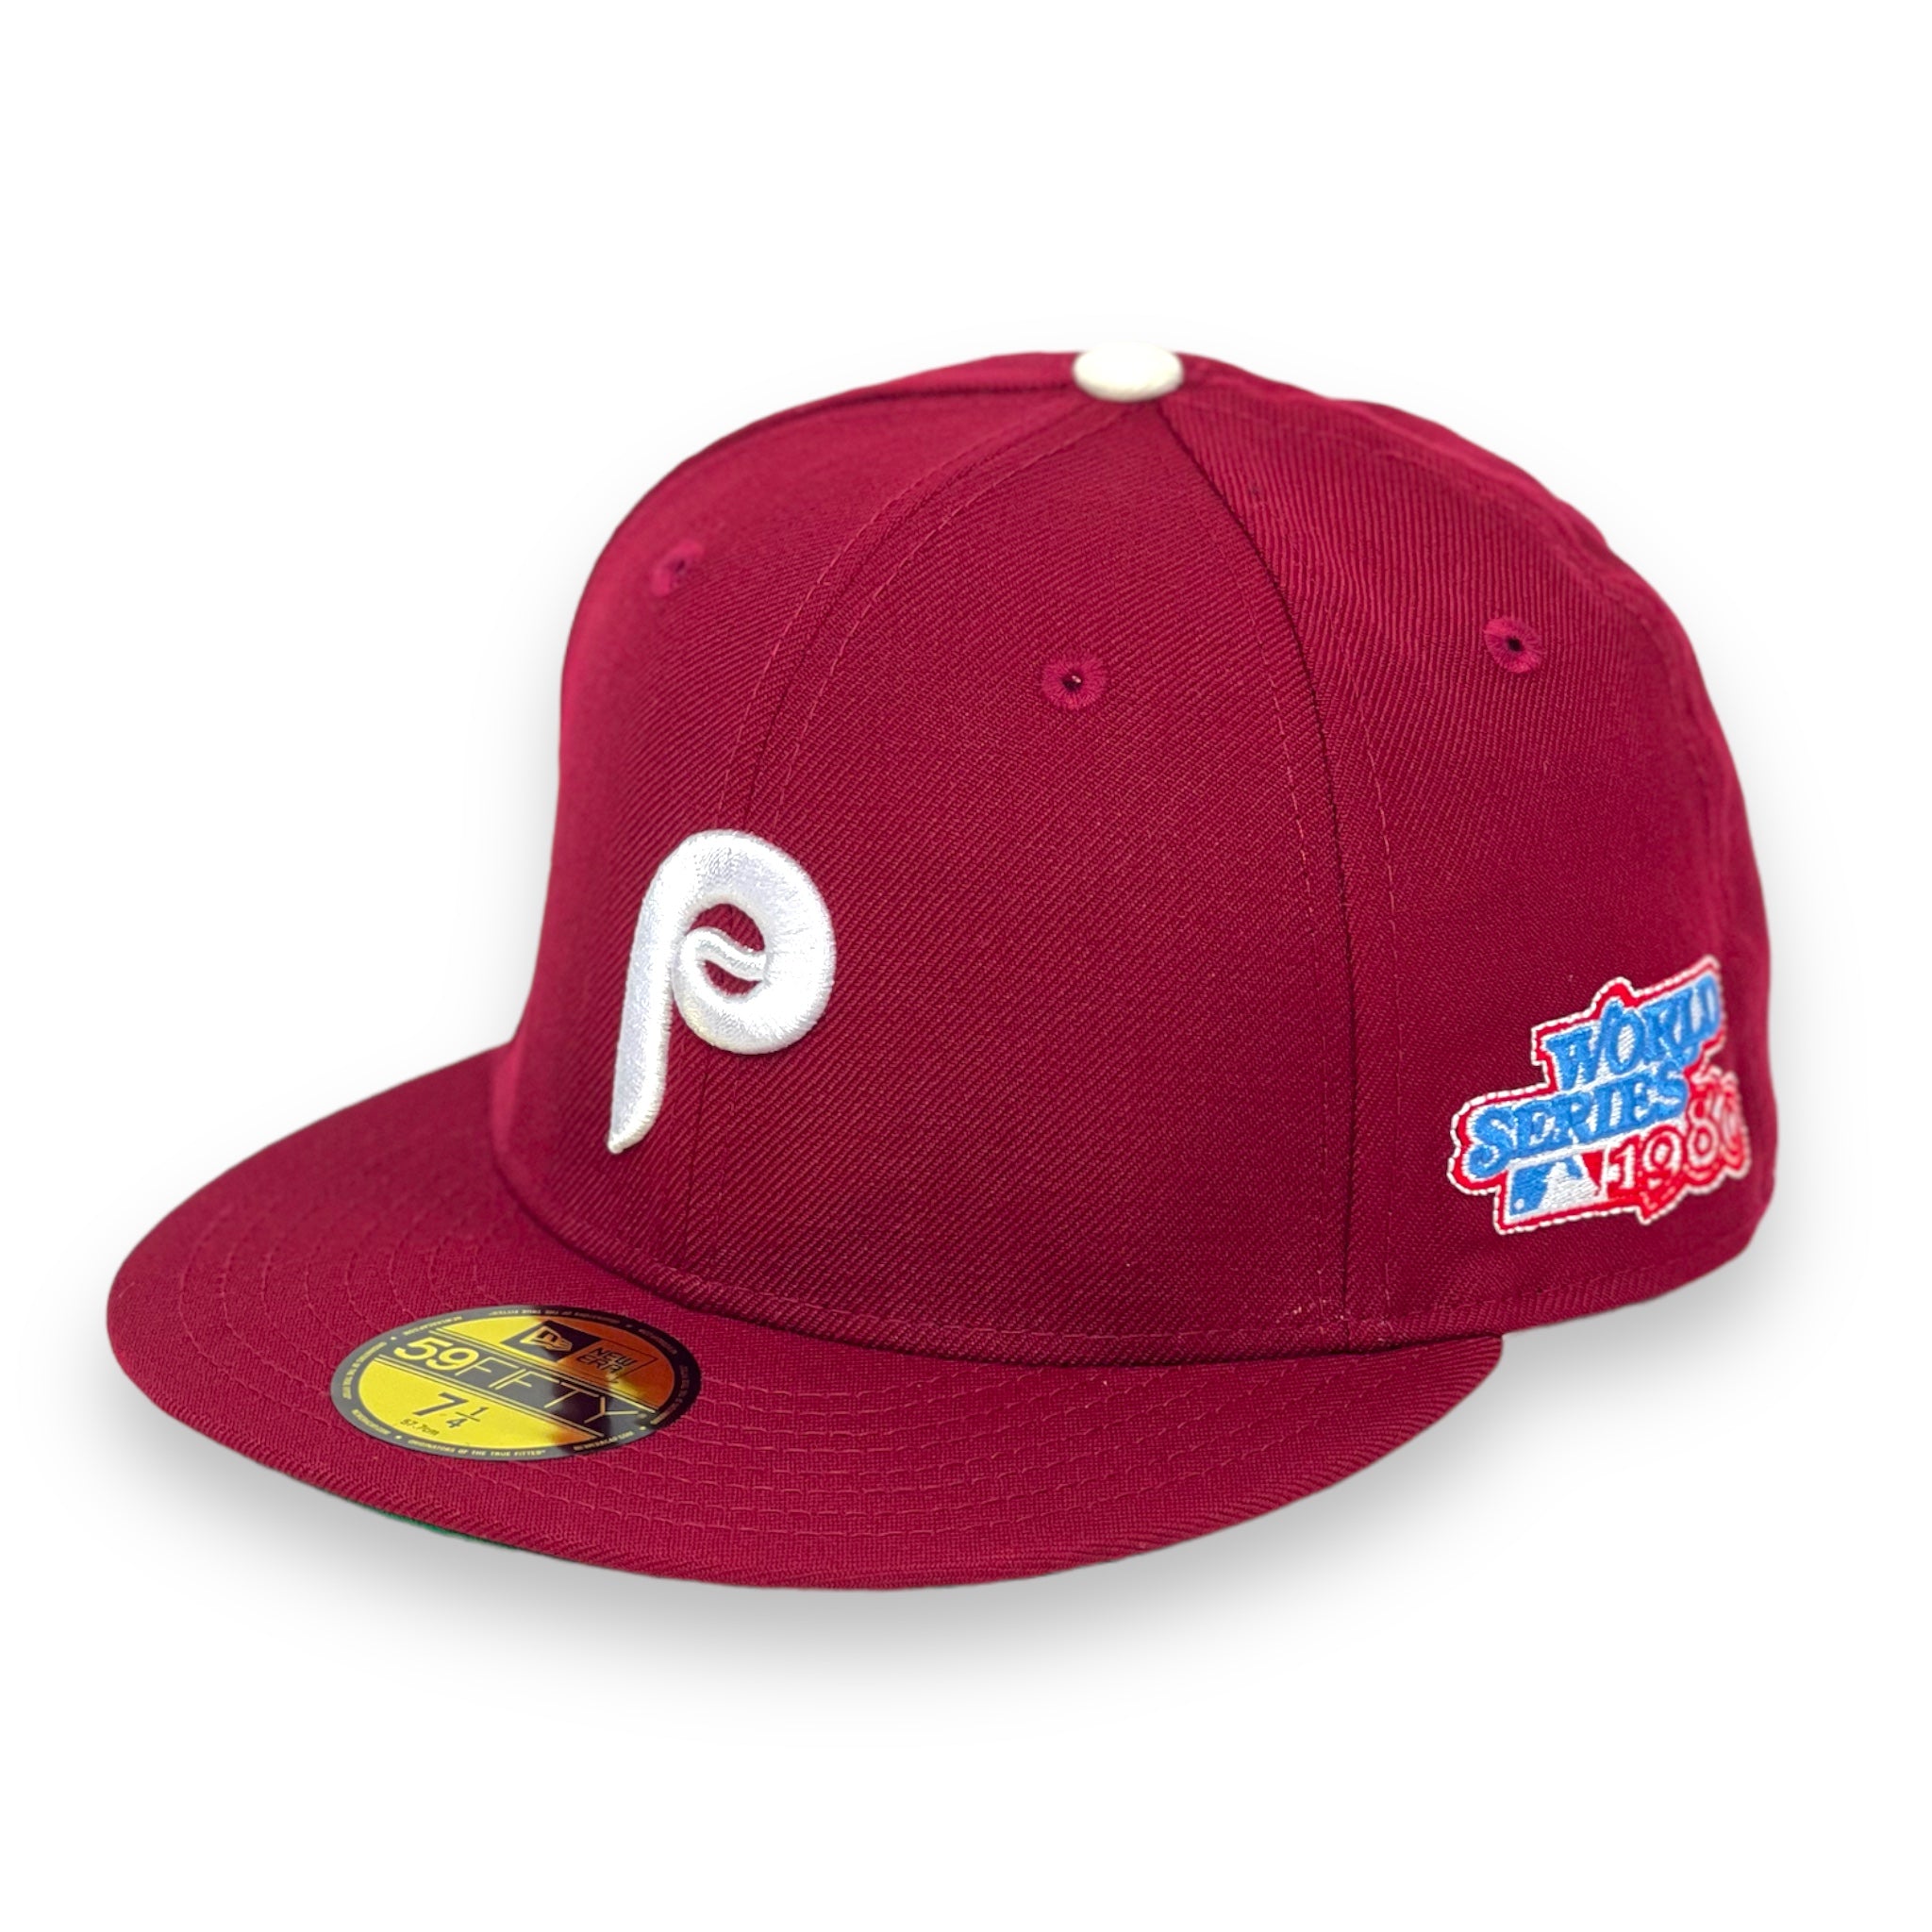 PHILADELPHIA PHILLIES (1980 WORLD SERIES) NEW ERA 59FIFTY FITTED